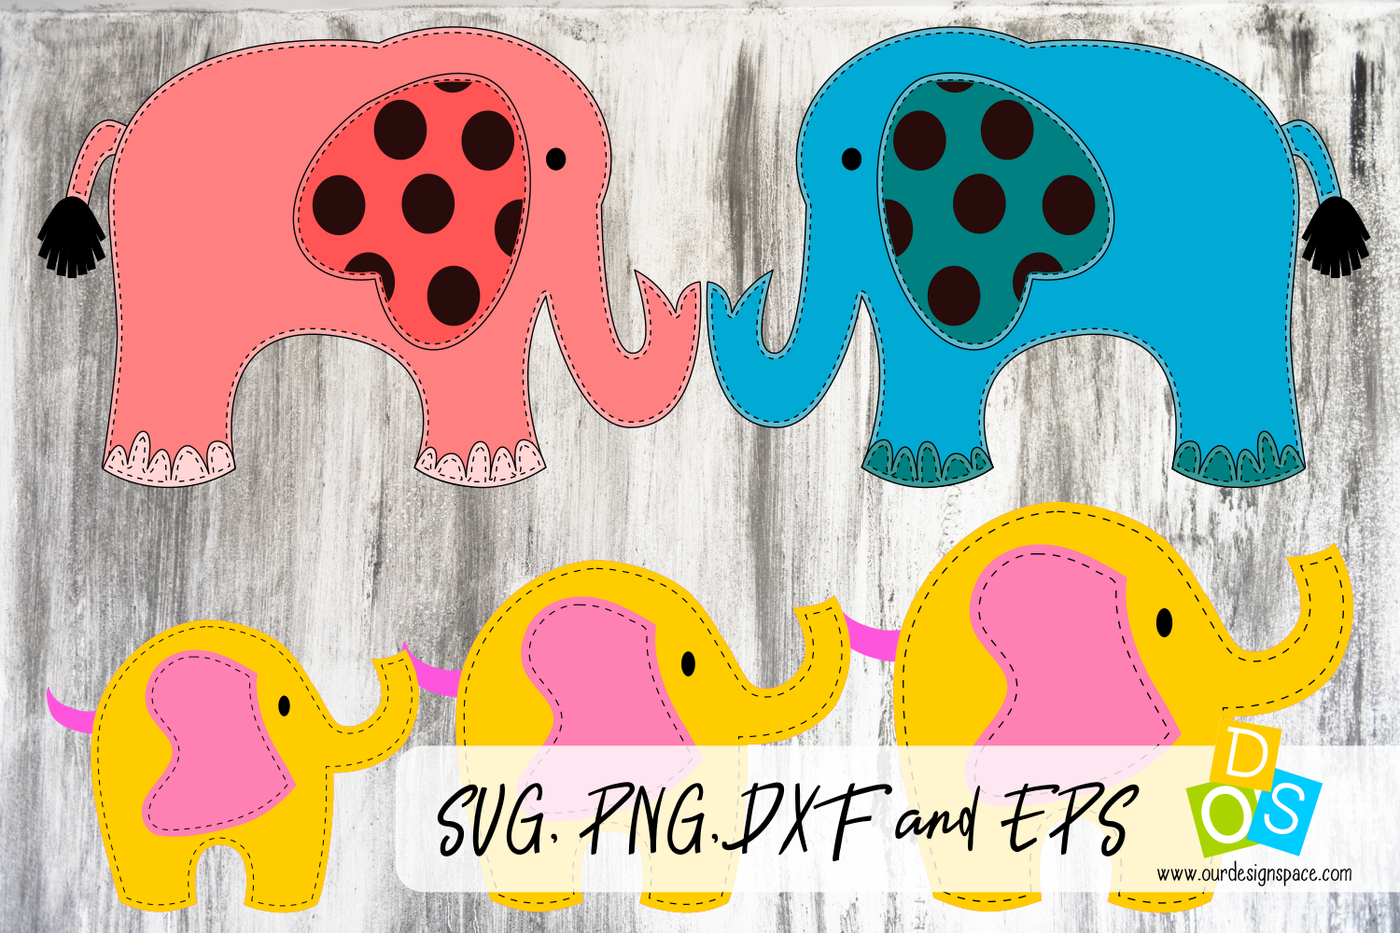 Elephant Family SVG, PNG, DXF and EPS cutting file By Our Design Space